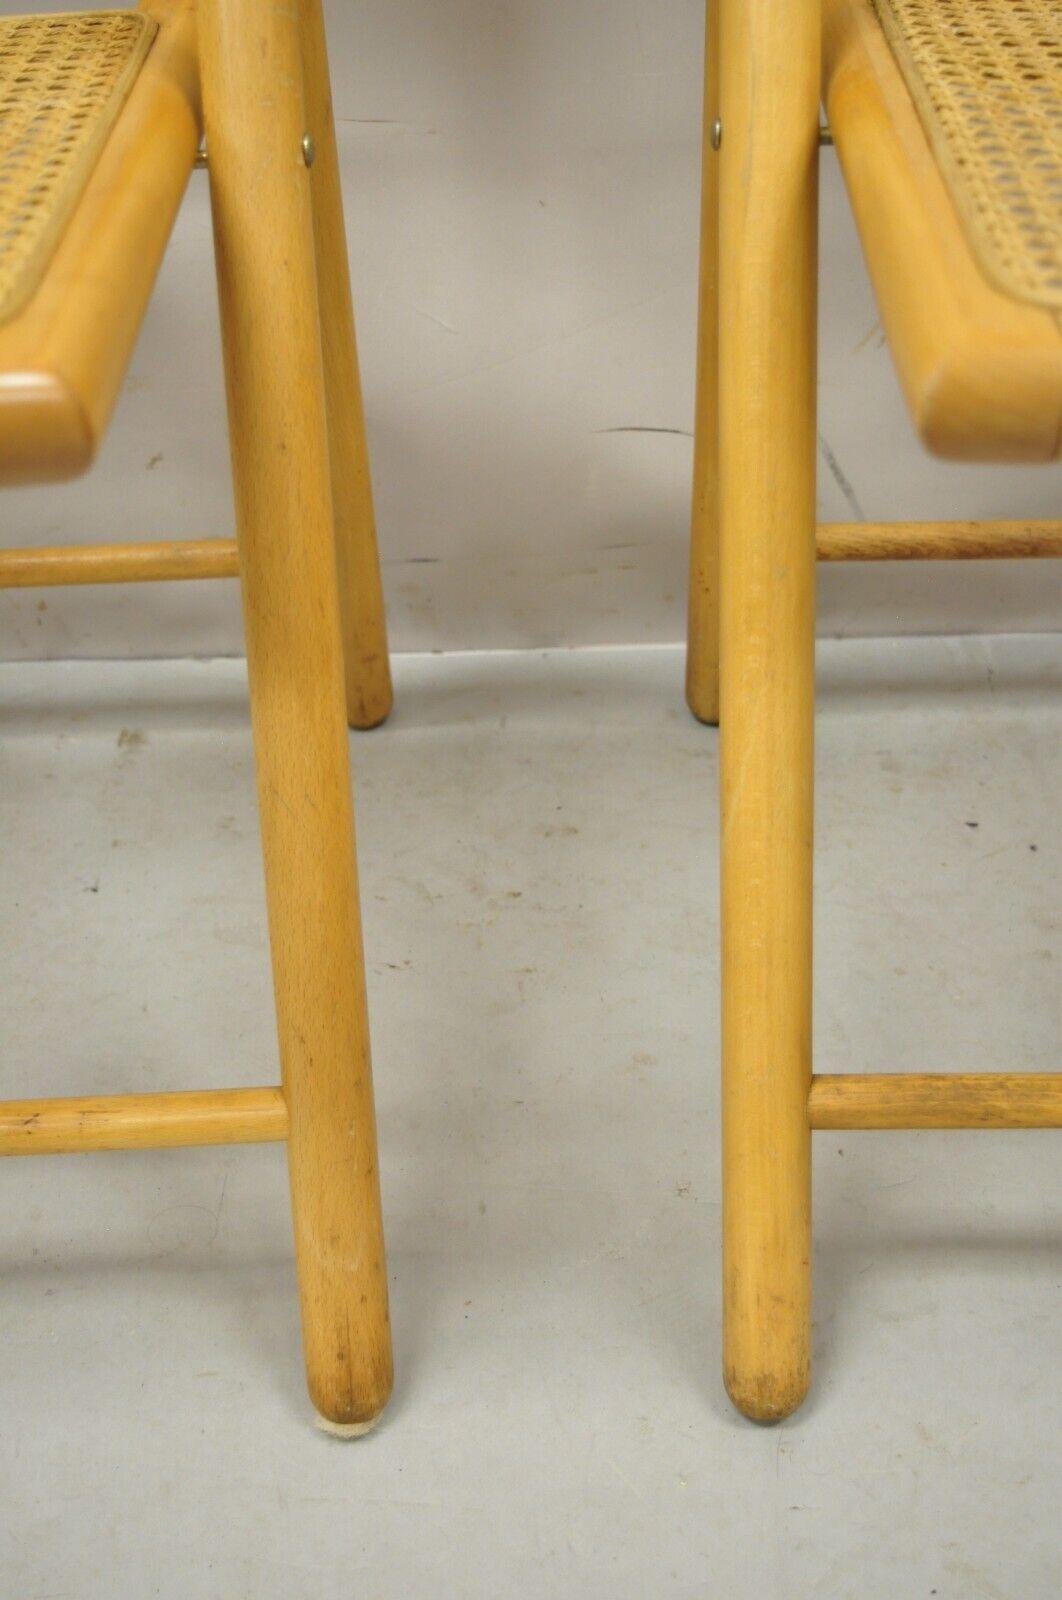 Vintage Habitat England Bentwood Cane Rattan Folding Chairs - a Pair In Good Condition For Sale In Philadelphia, PA